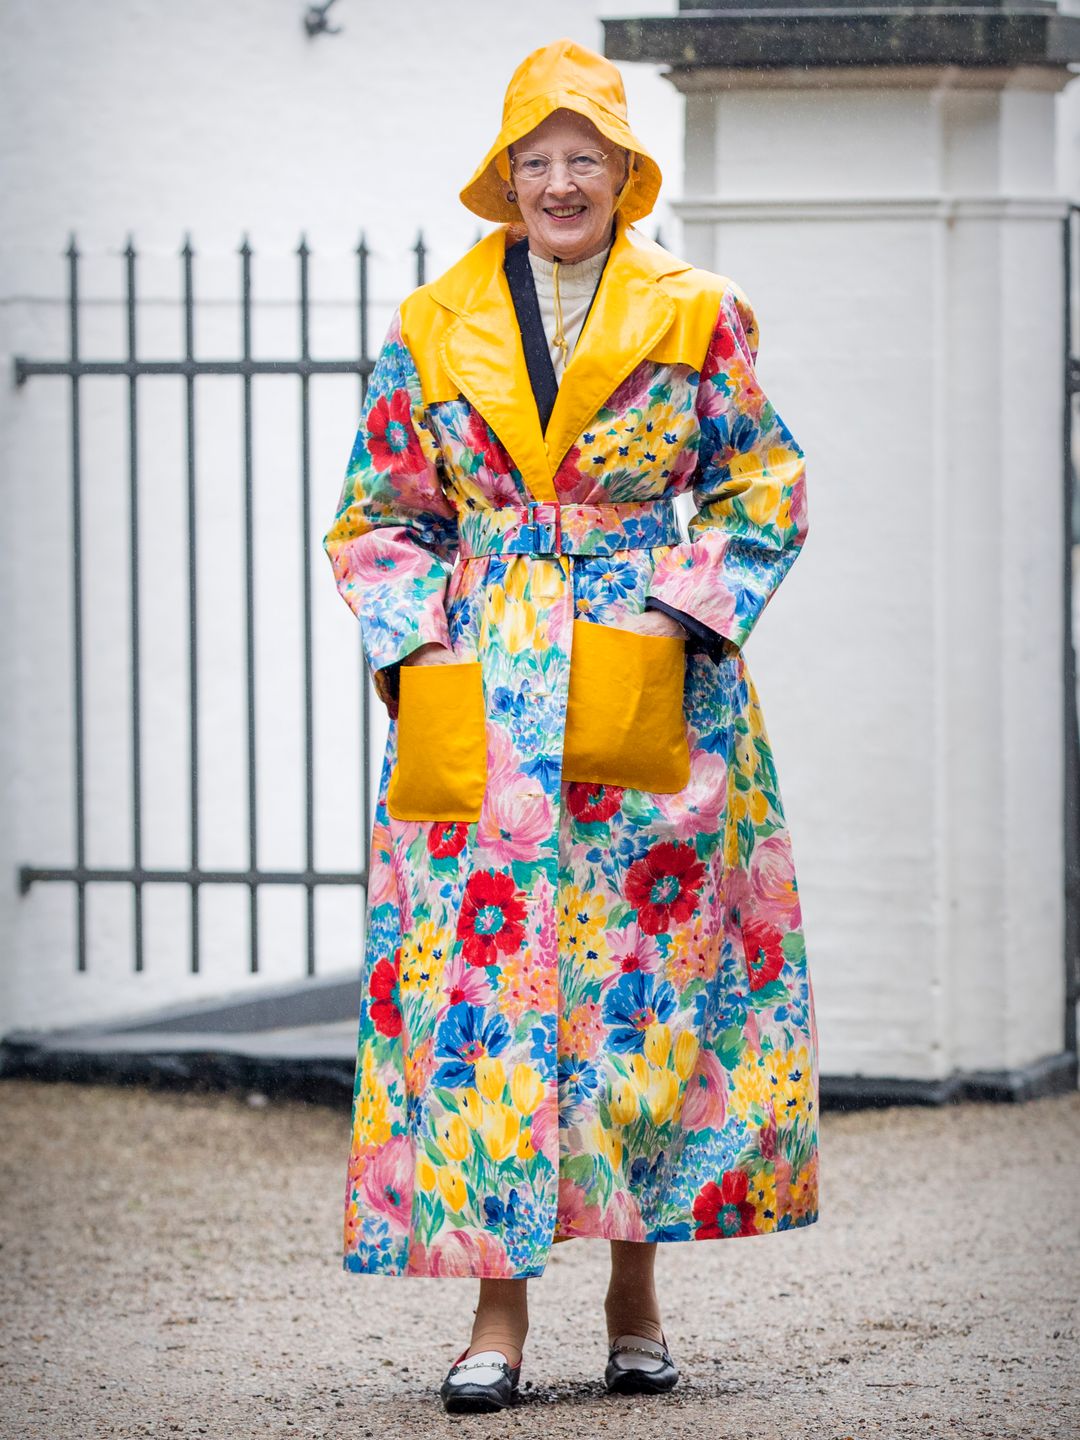 Queen Margrethe of Denmark attends the Ringsted horse ceremony in a floral rain coat and mathcing hat